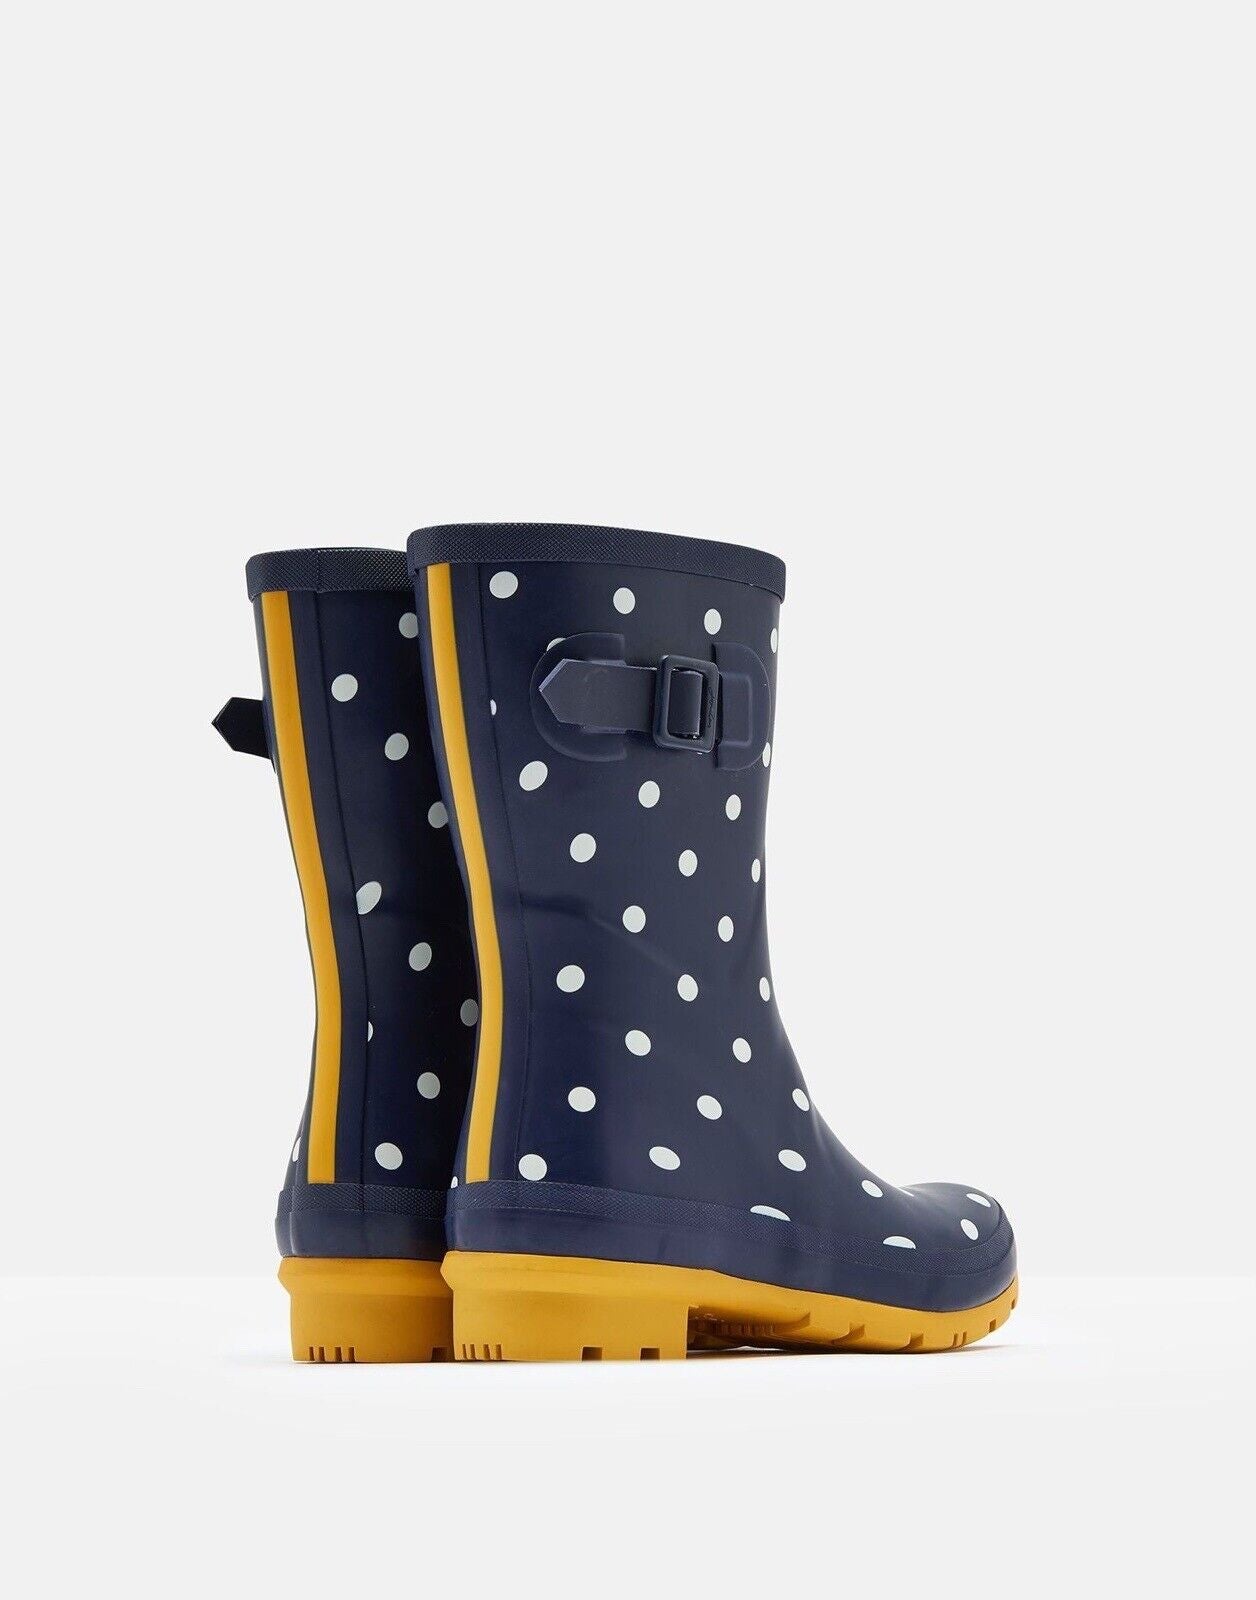 EX Joules Womens Wellies New Molly Mid Height Printed Navy Spot Sizes 3,4,5,7,8